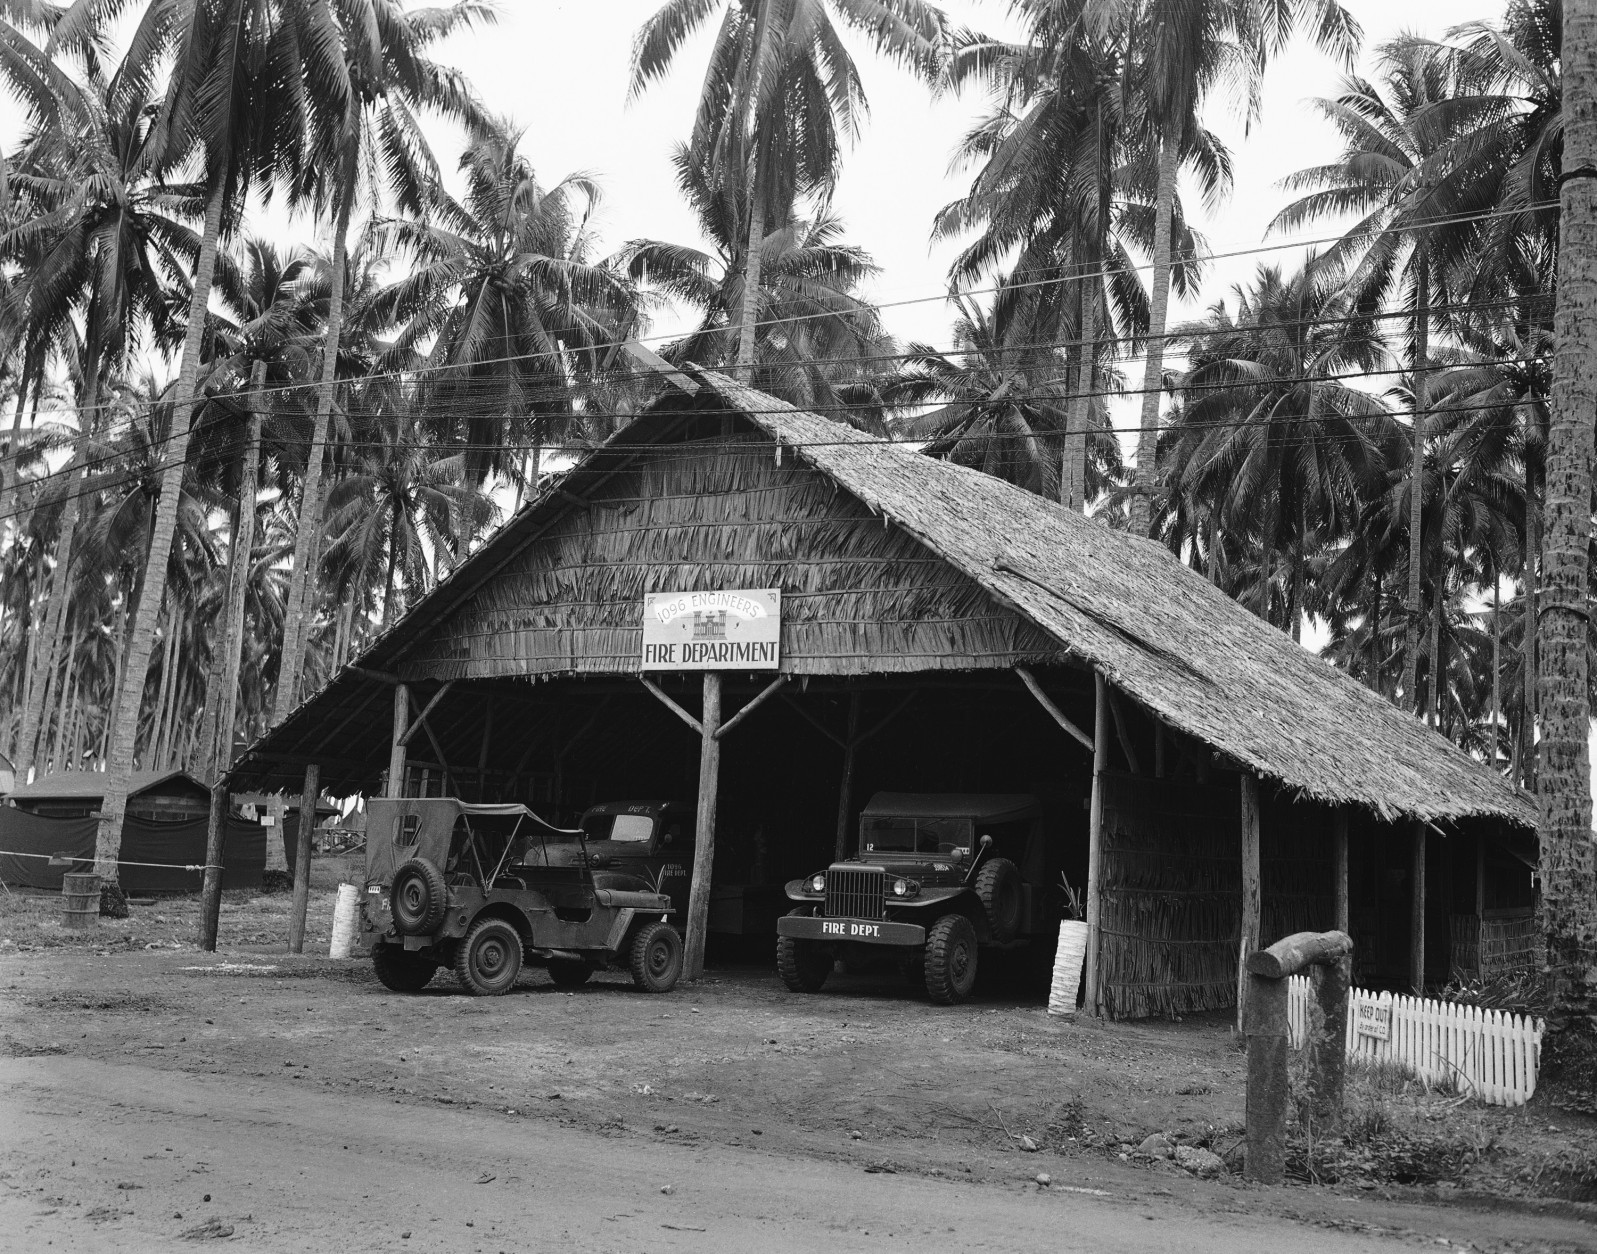 This native style thatched hut houses the Guadalcanal fired department, shown April 26, 1944, which is operated by the Army and consists of the latest fire-fighting equipment. (AP Photo/Frank Filan)